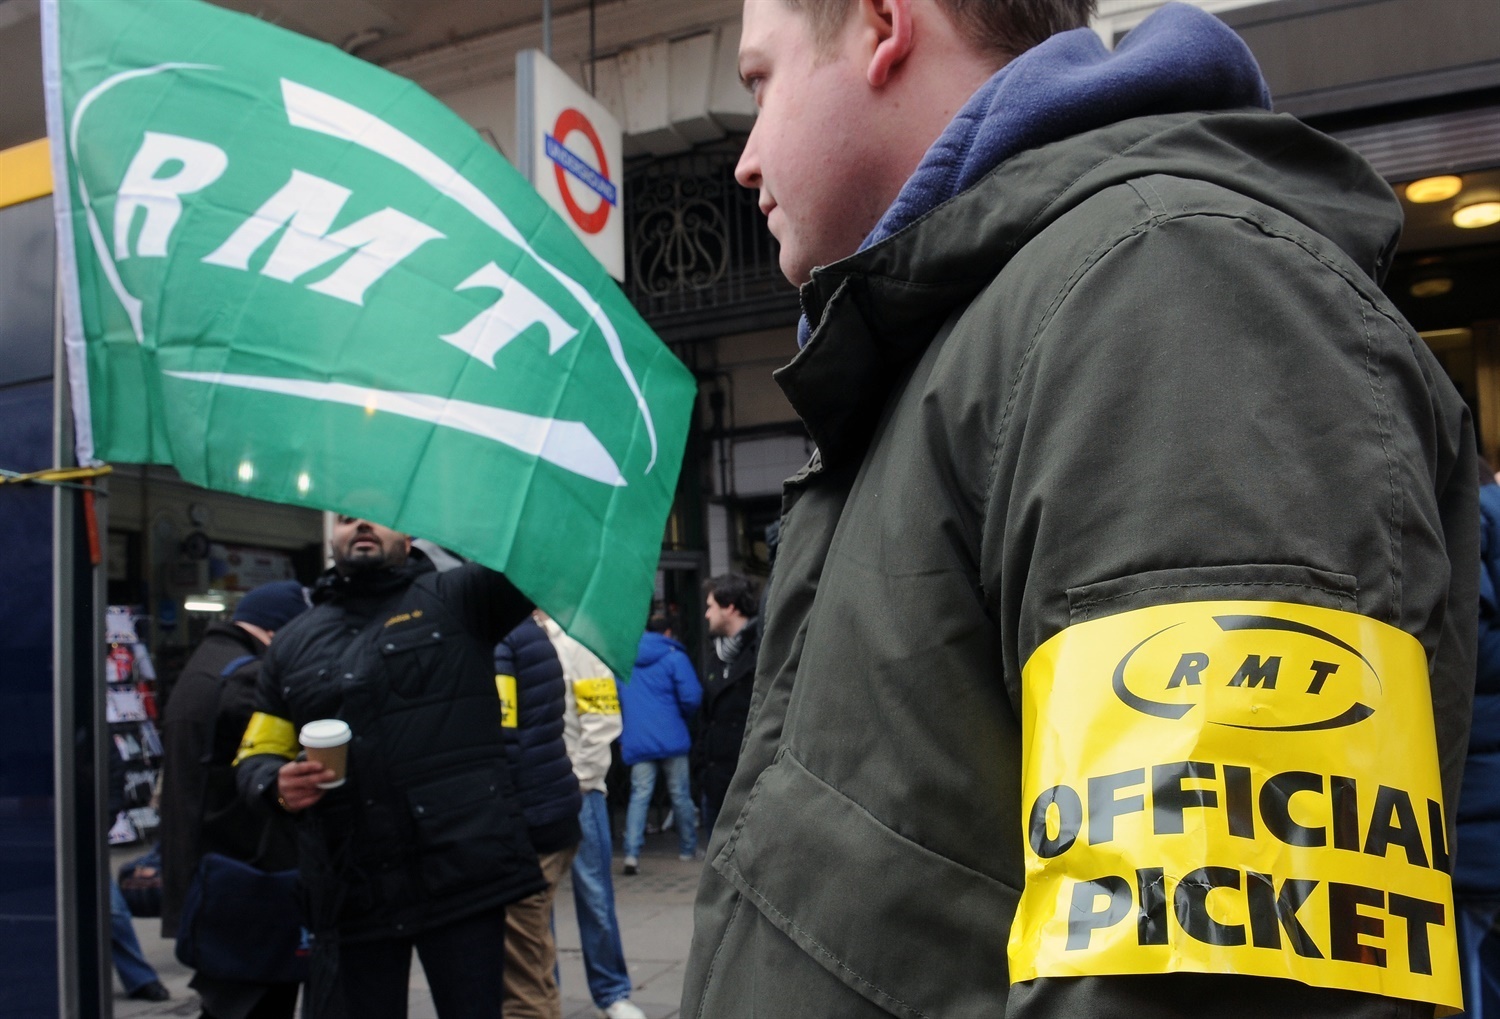 RMT confirms triple strike action to set up day of misery for passengers